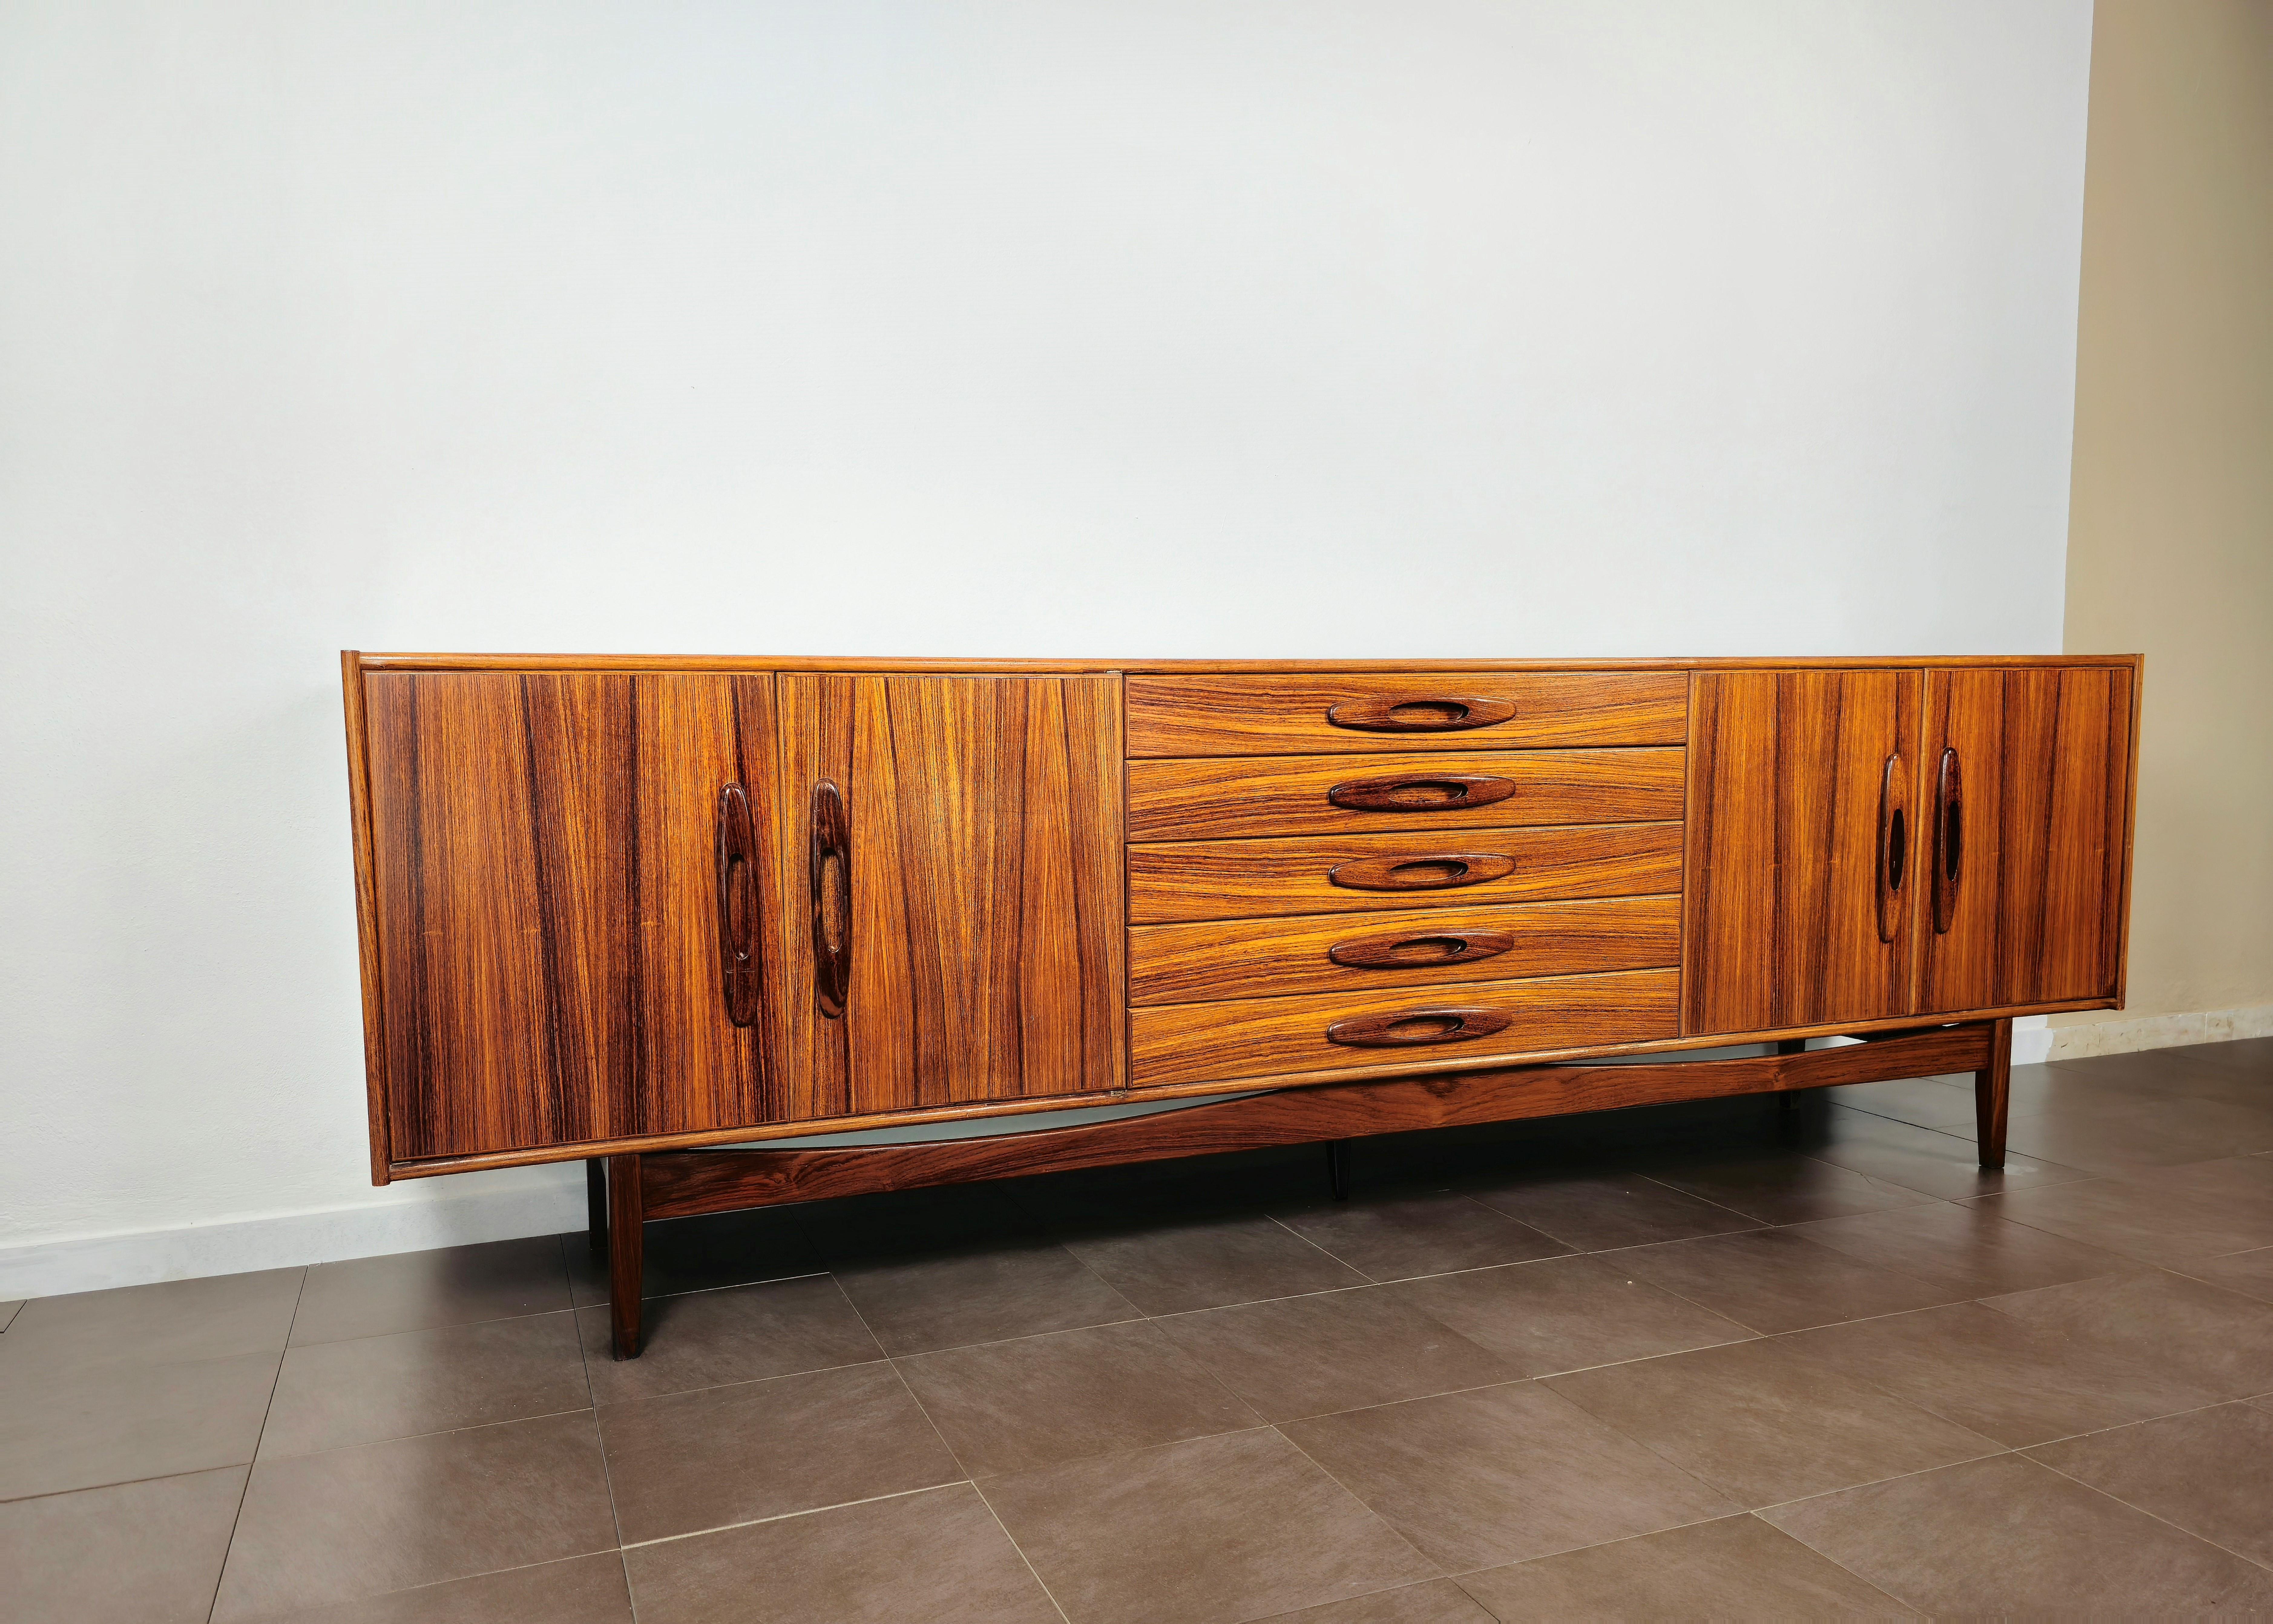 Elegant sideboard of considerable size attributable to the Danish designer ib kofod larsen and produced in the 60s.
The 5 foot sideboard was made in wood with 4 doors and 5 drawers.